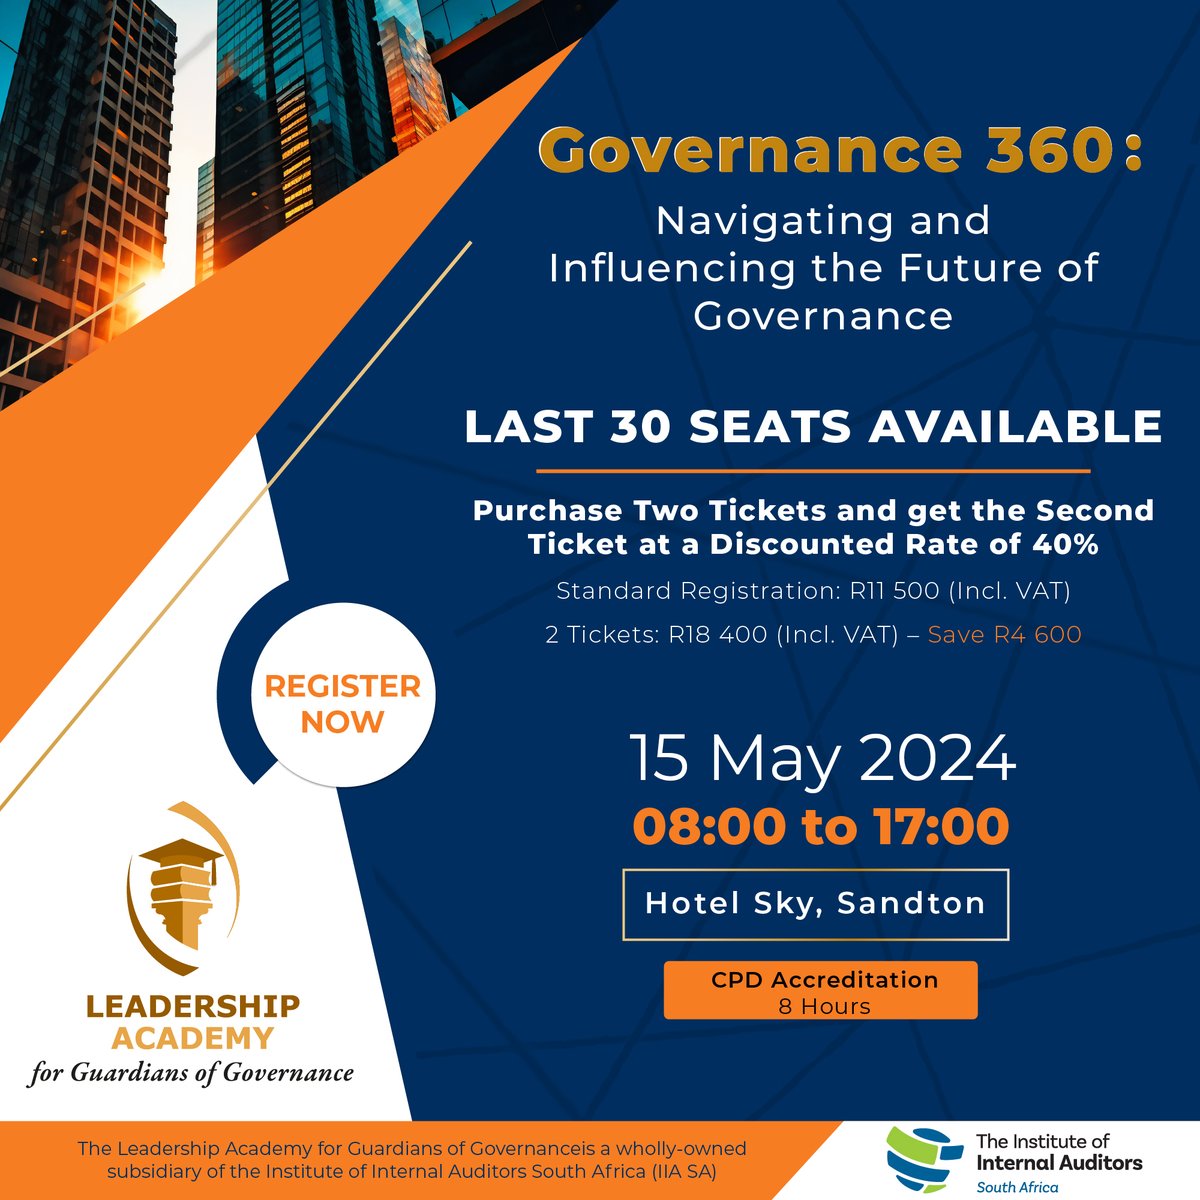 Register now - evolve.eventoptions.co.za/register/gover… – and save R4600 on your second ticket, i.e. a 40% discount, when you buy two tickets   for the upcoming Governance 360: Navigating and Influencing the Future of Governance Conference. Only 30 seats left!

@IIASOUTHAFRICA